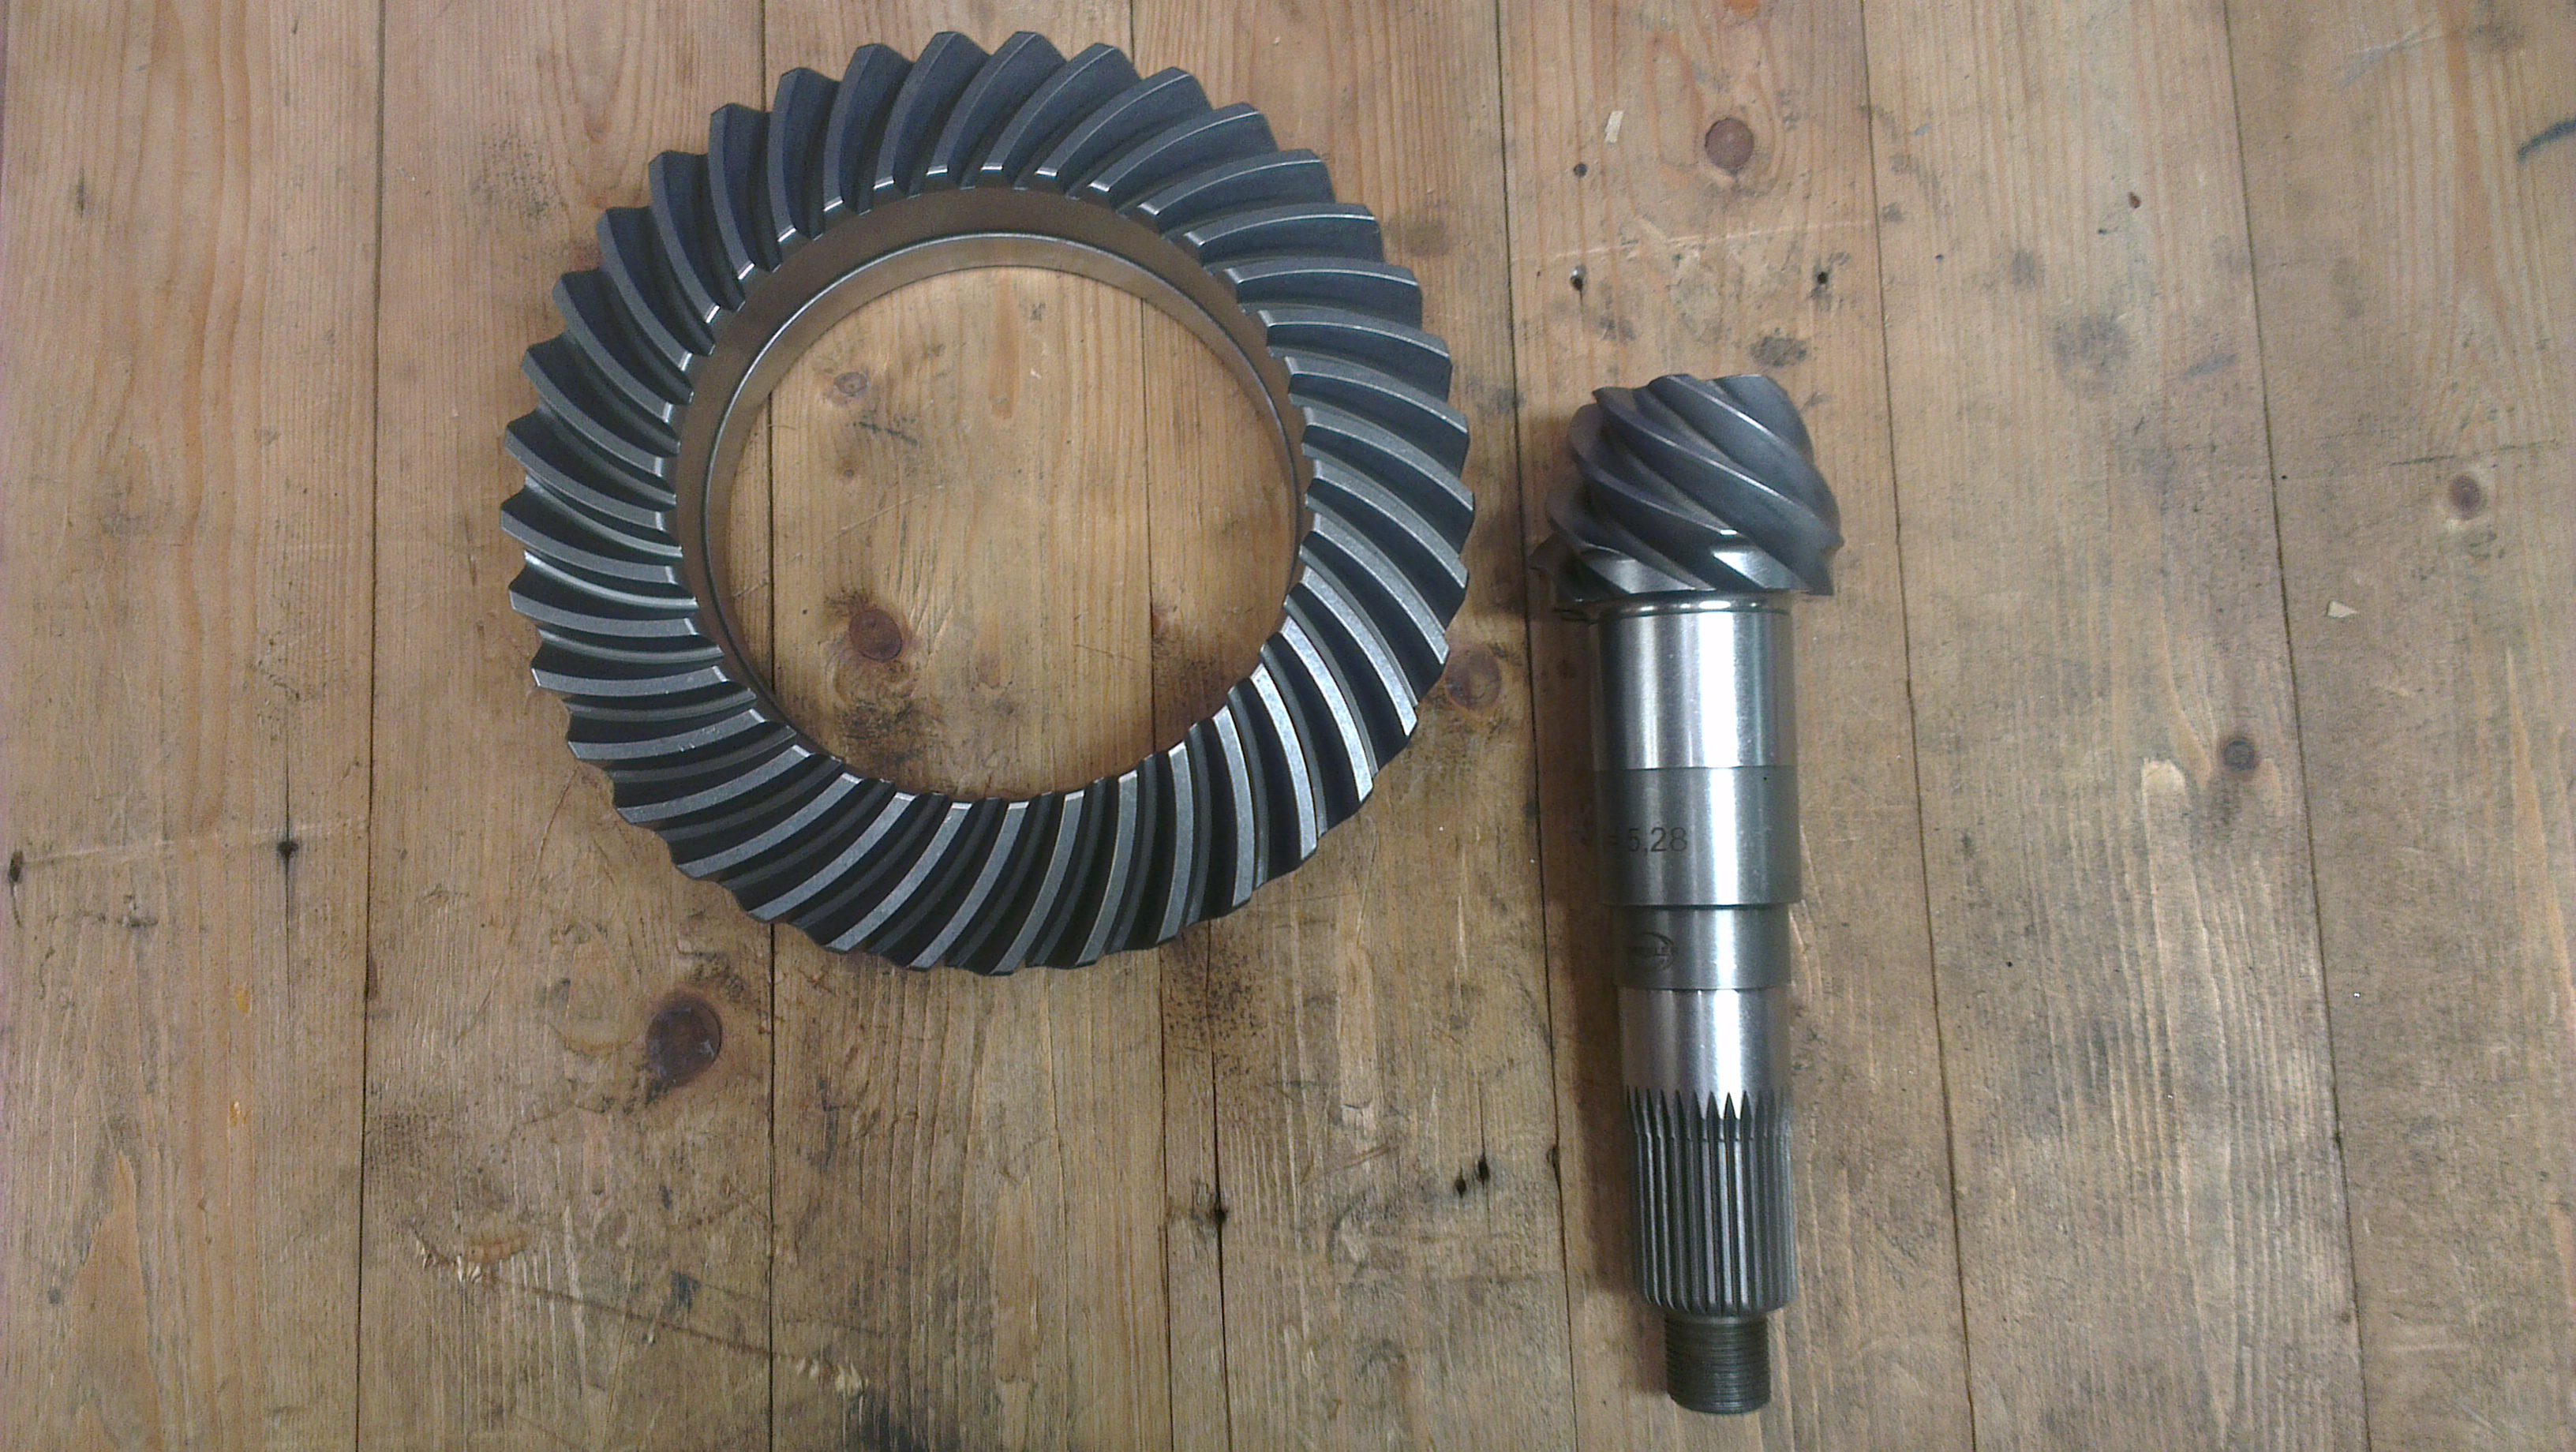 210mm Diff gearset